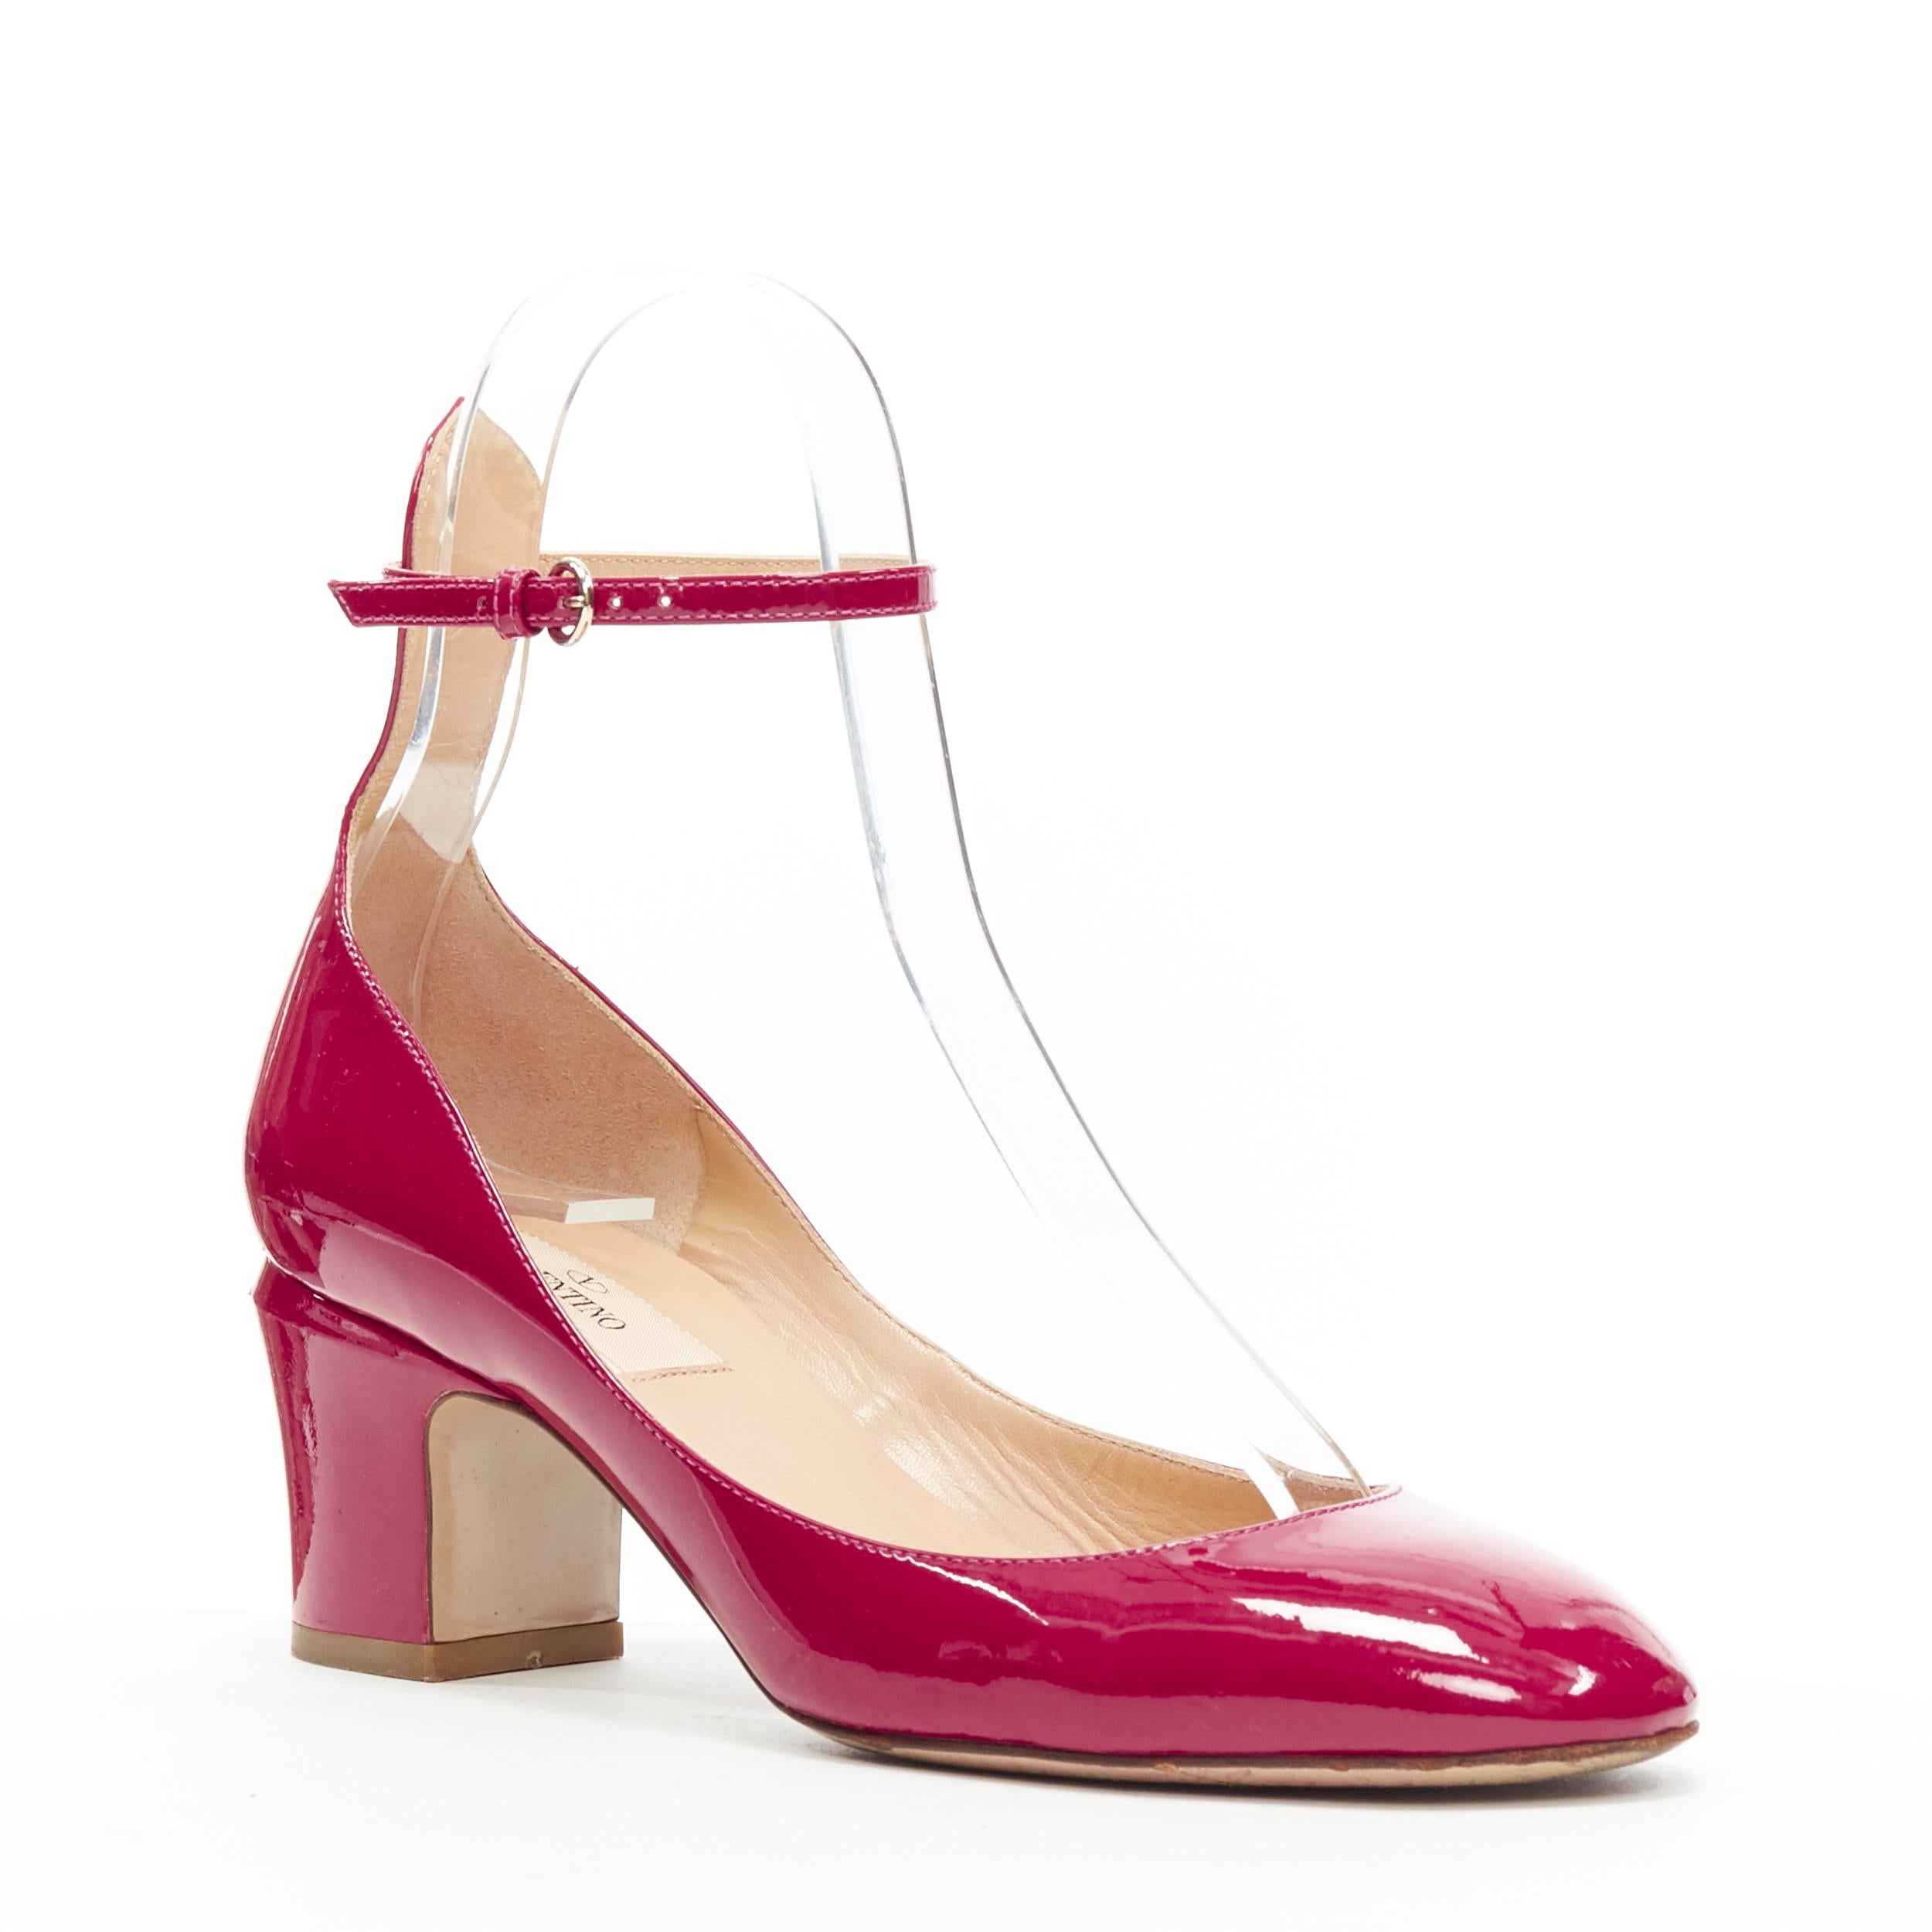 VALENTINO Tango fuschia pink patent ankle strap maryjane block heel pump EU36
Brand: Valentino
Model Name / Style: Tango
Material: Leather
Color: Pink
Pattern: Solid
Closure: Ankle strap
Extra Detail: Mid (2-2.9 in) heel height. Round Toe. Block